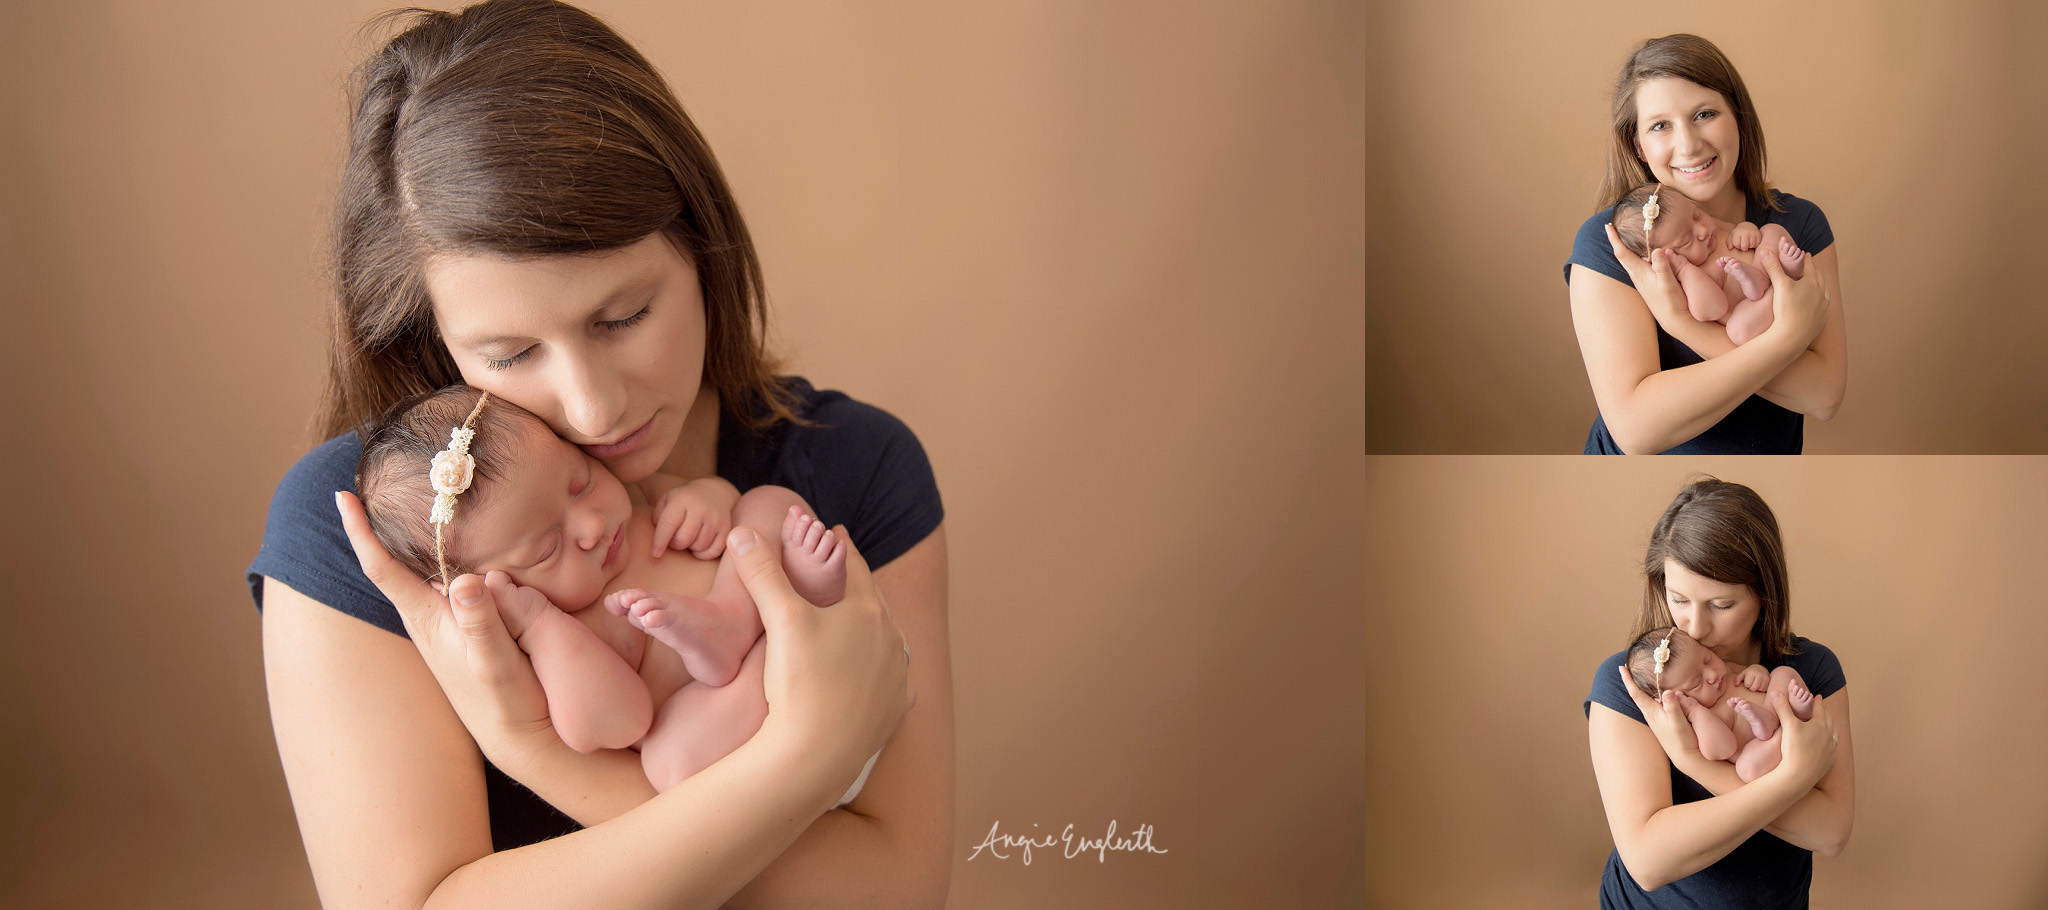 lancaster_newborn_and_maternity_photographer_angie_englerth_central_pa_b045.jpg